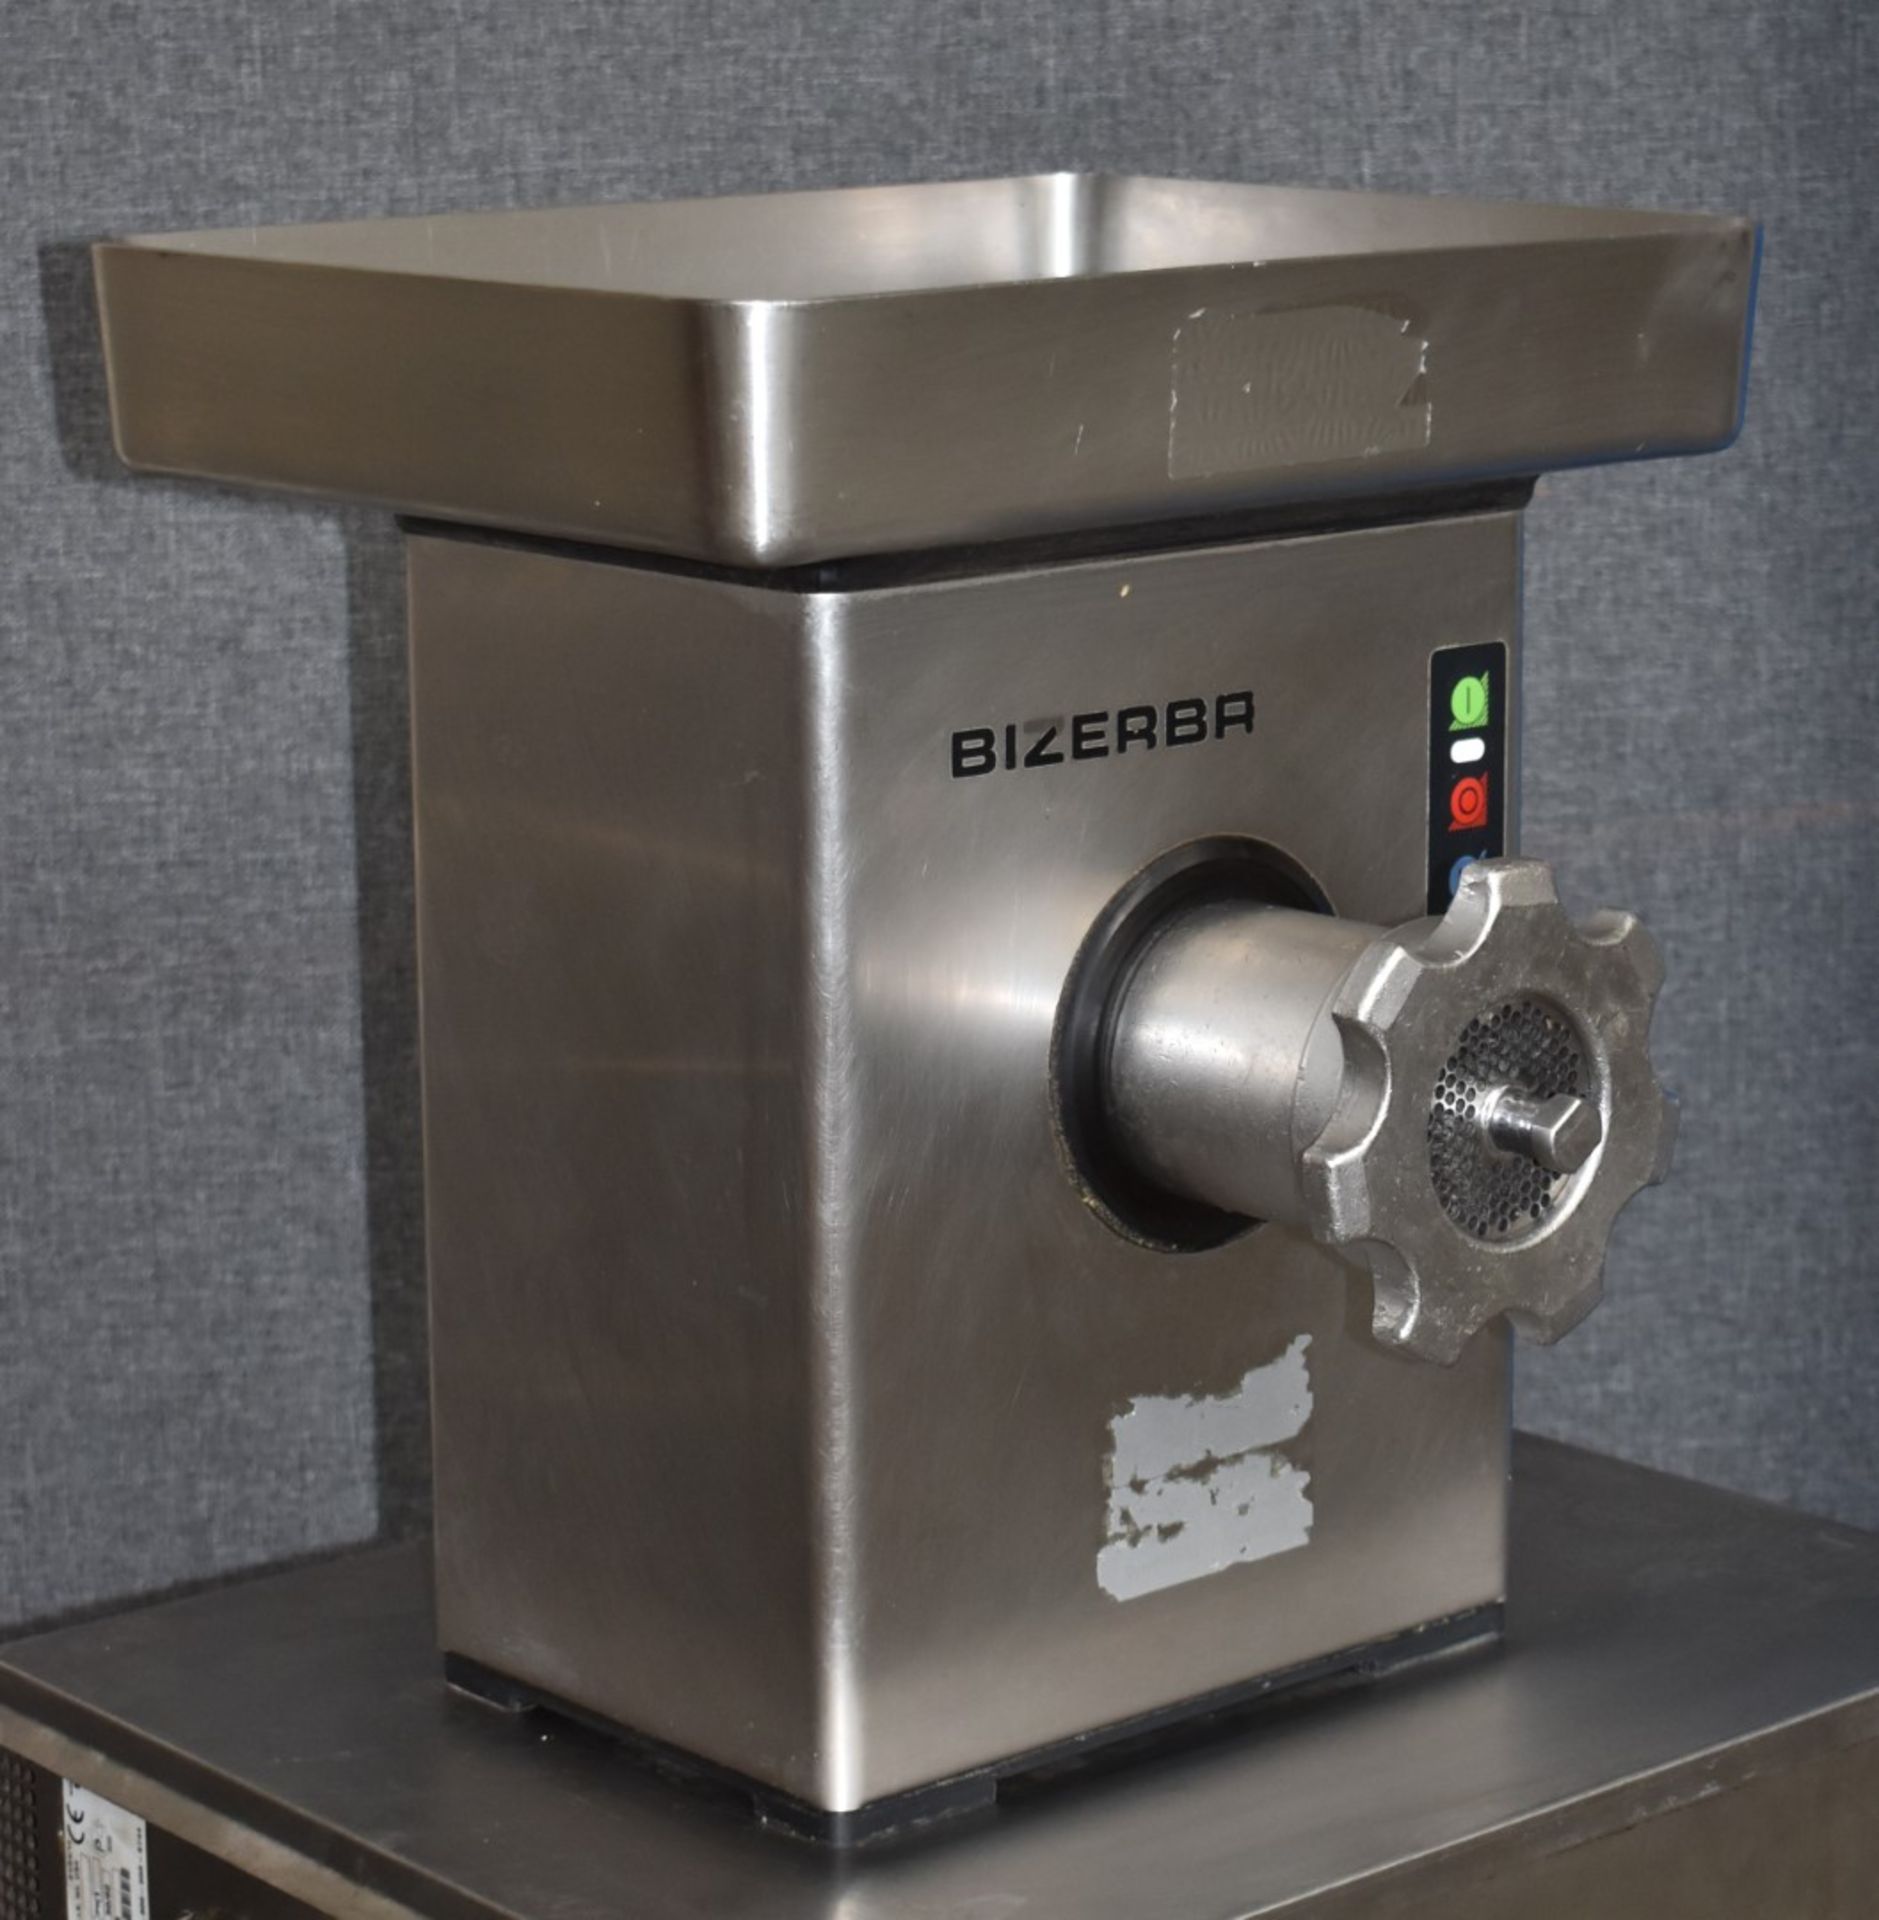 1 x Bizerba Meat Mincer - Stainless Steel Construction - Model FW-N 22/2 - 240v UK Plug - Recently - Image 4 of 12